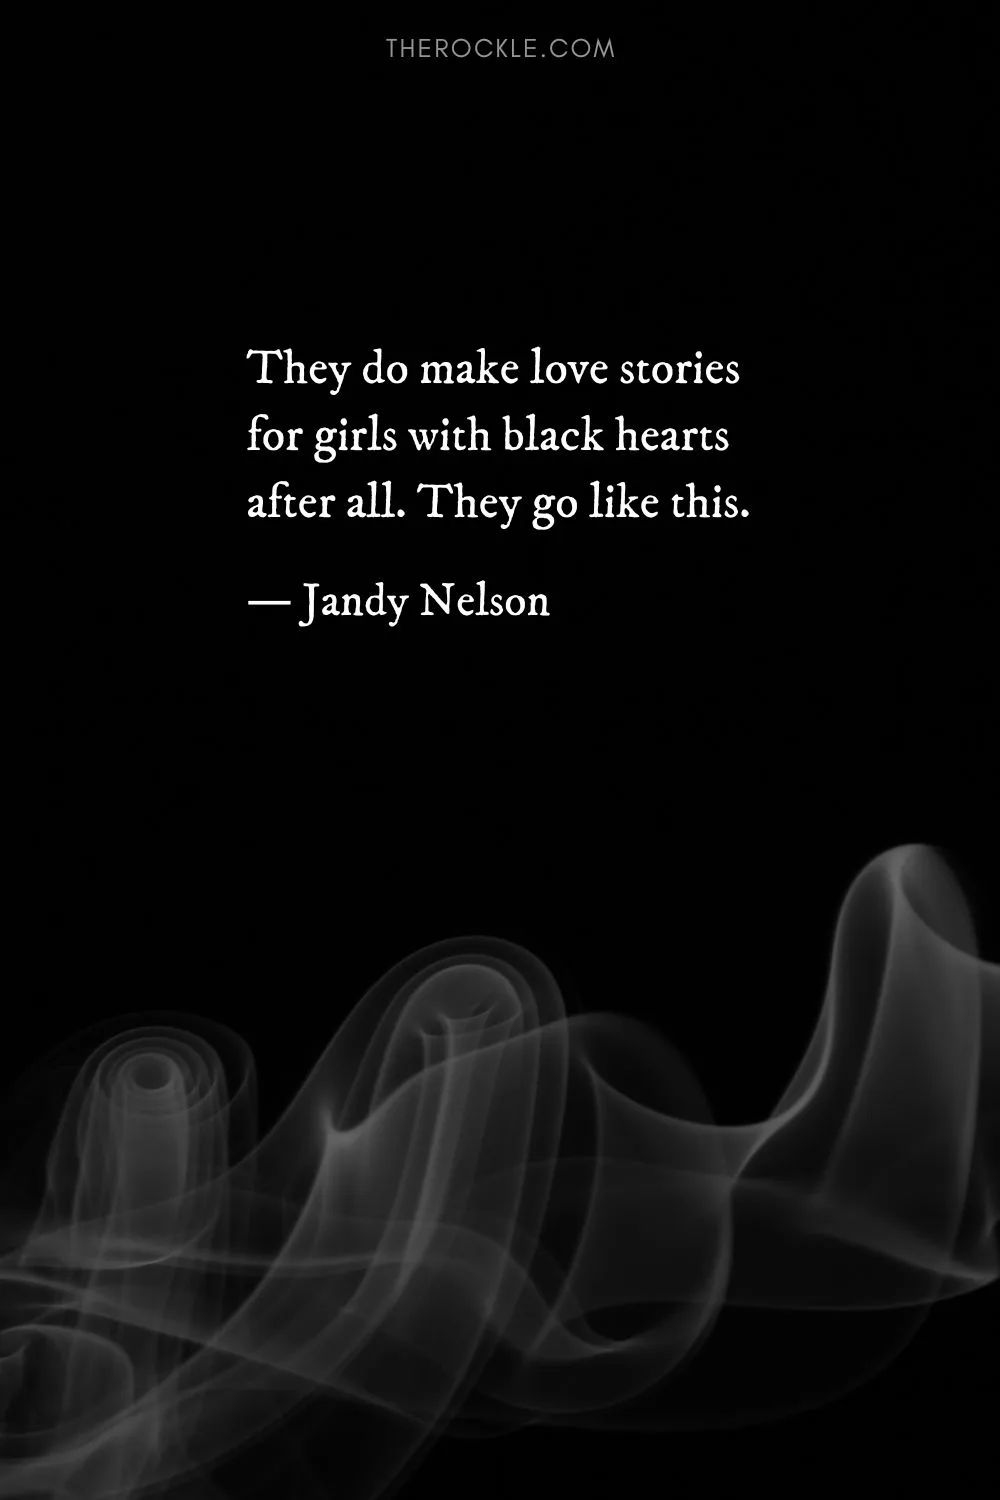 “They do make love stories for girls with black hearts after all. They go like this.” ― Jandy Nelson